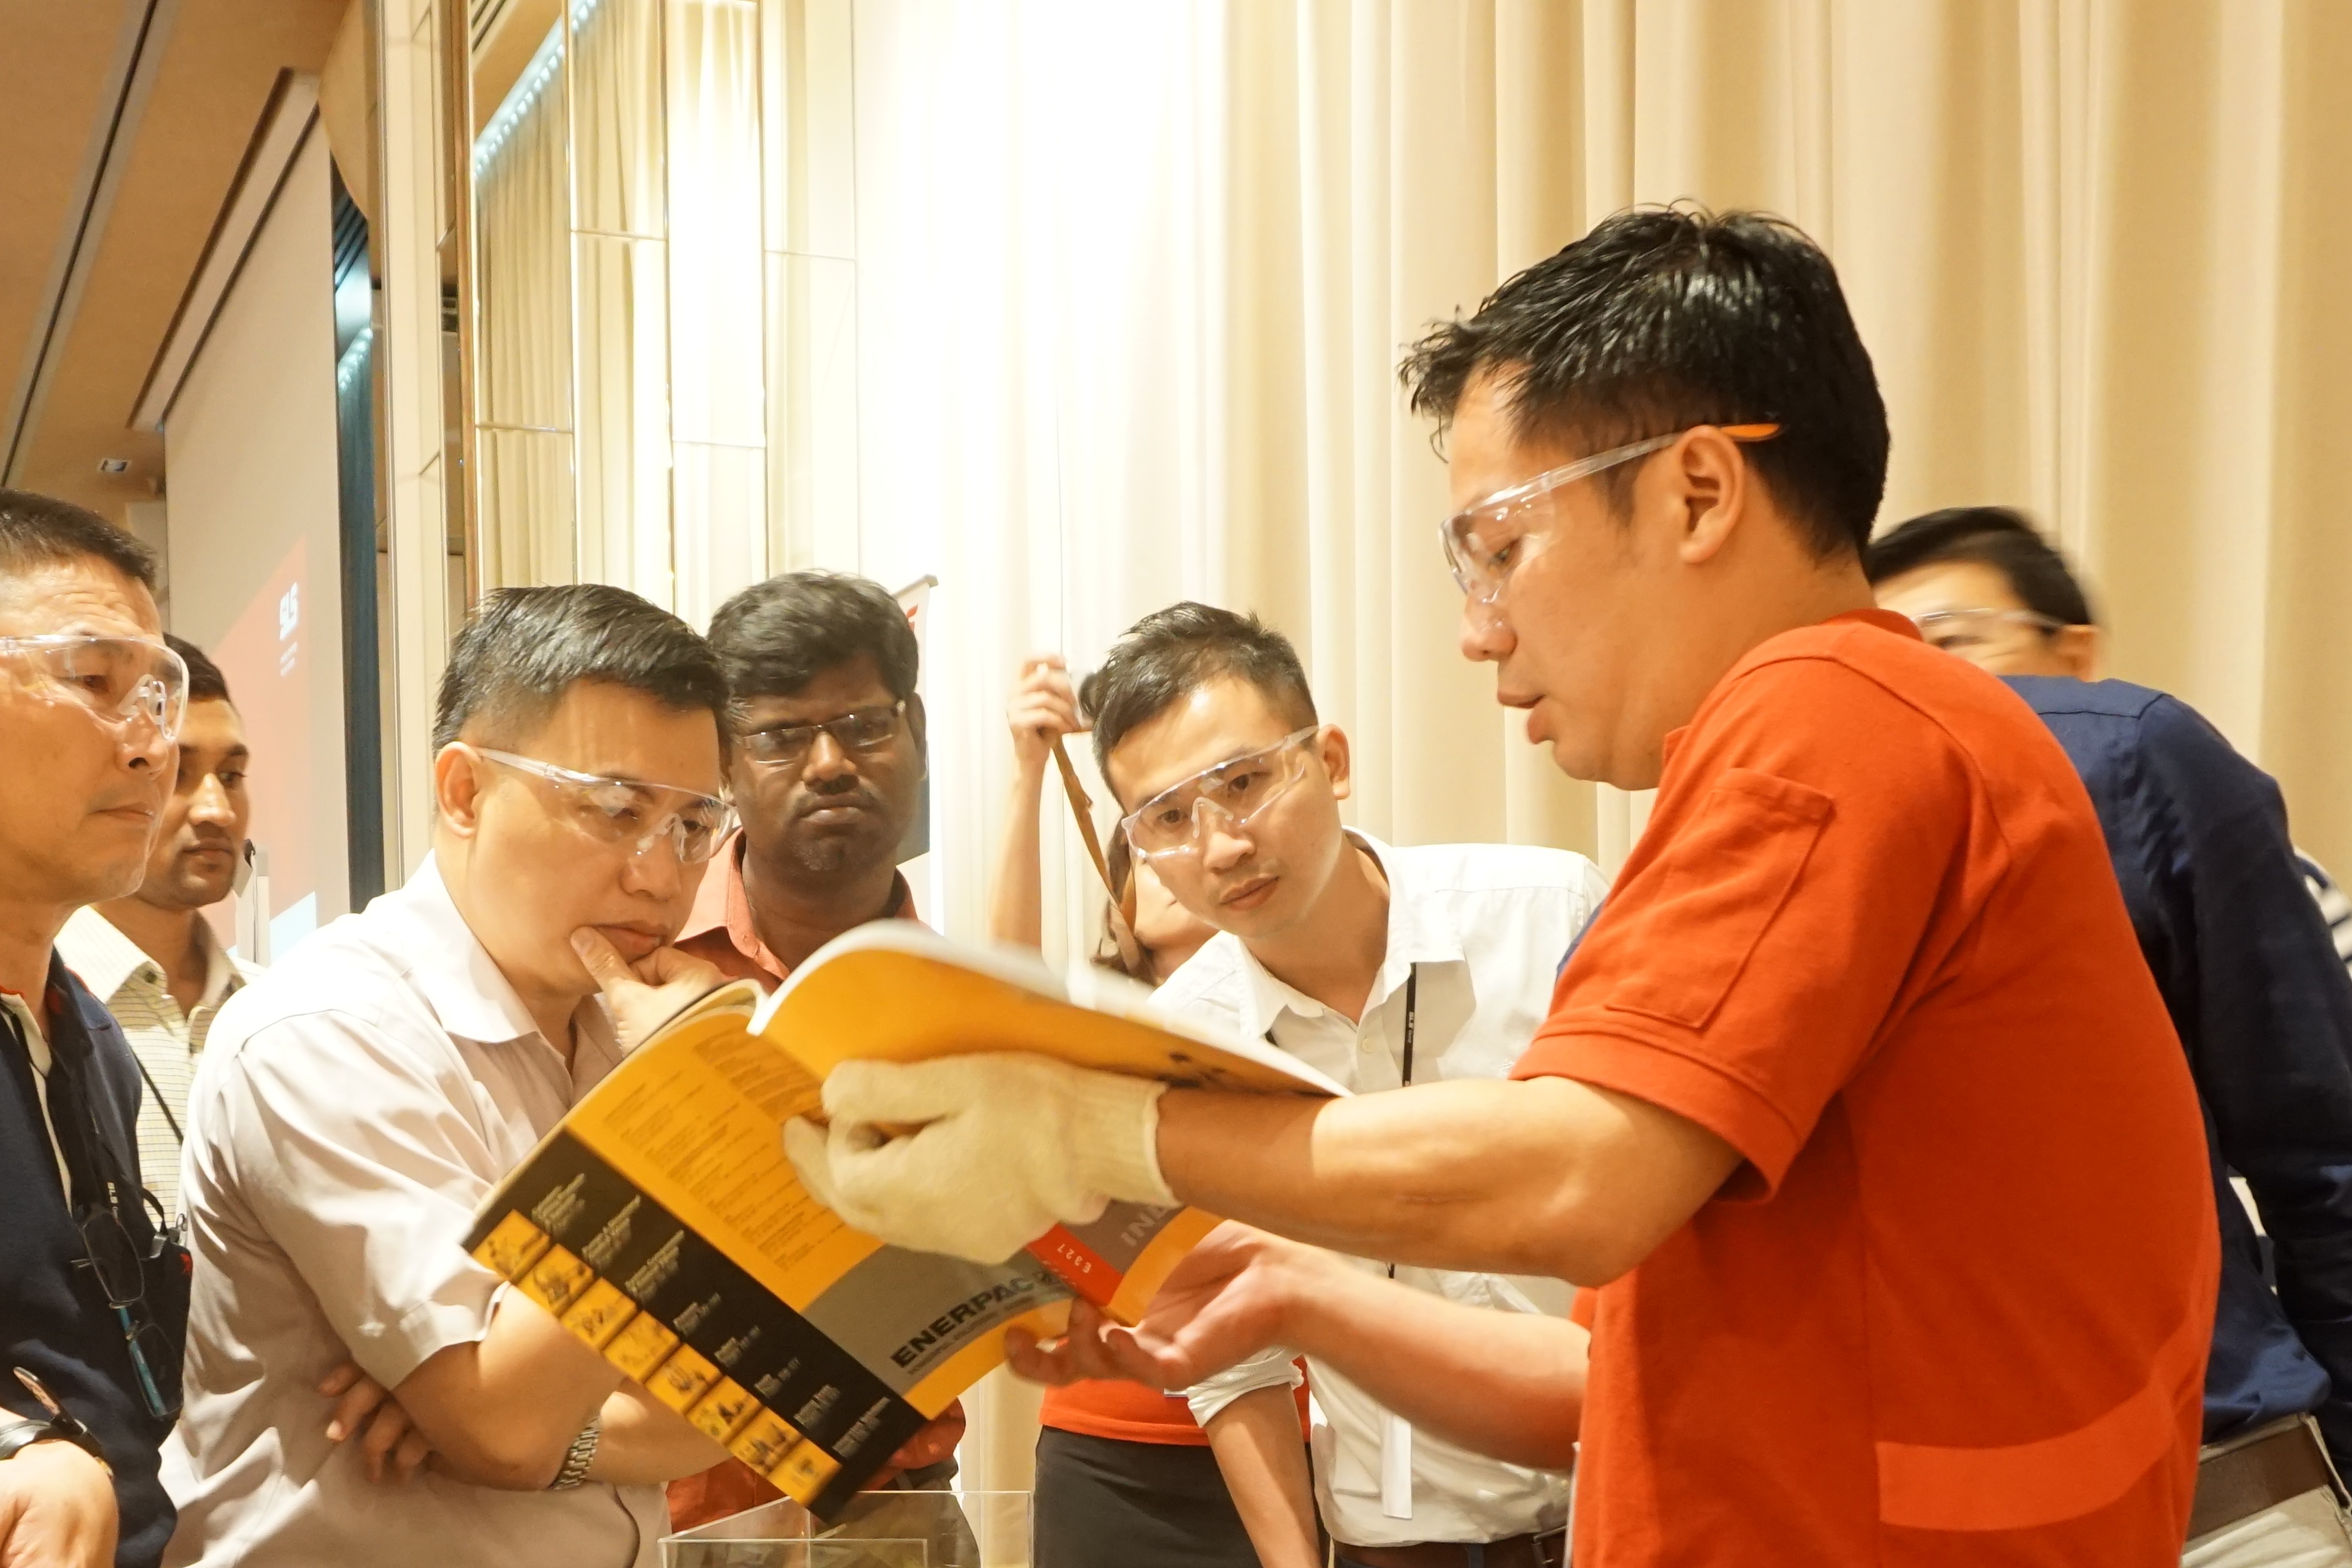 Image shows an SLS engineer showing an Enerpac product catalog to a group of customers